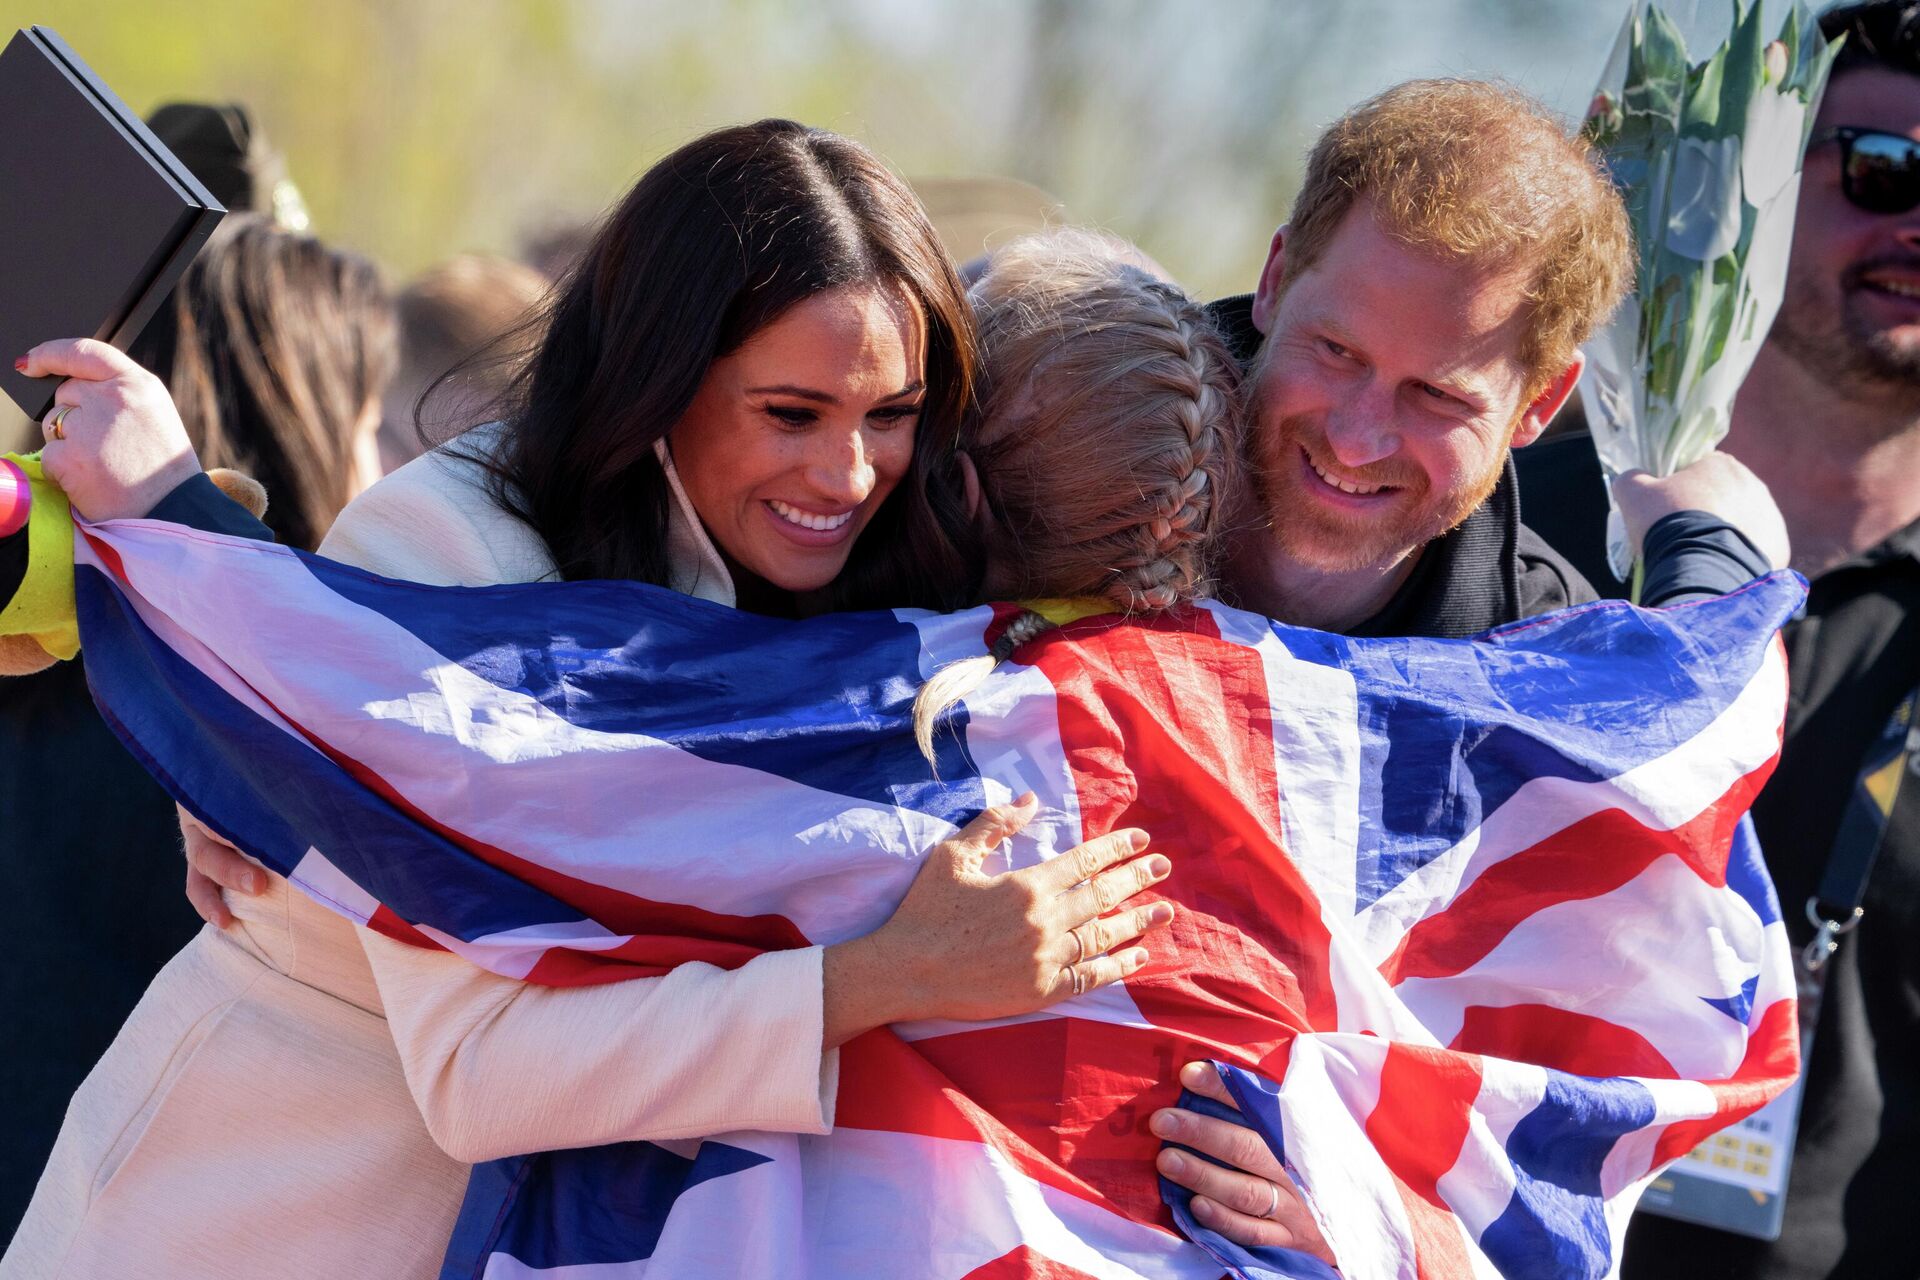 Prince Harry and Meghan Markle, Duke and Duchess of Sussex, hug Lisa Johnston, a former army medic and amputee, who celebrates with her medal at the Invictus Games venue in The Hague, Netherlands, Sunday, April 17, 2022 - Sputnik International, 1920, 25.04.2022